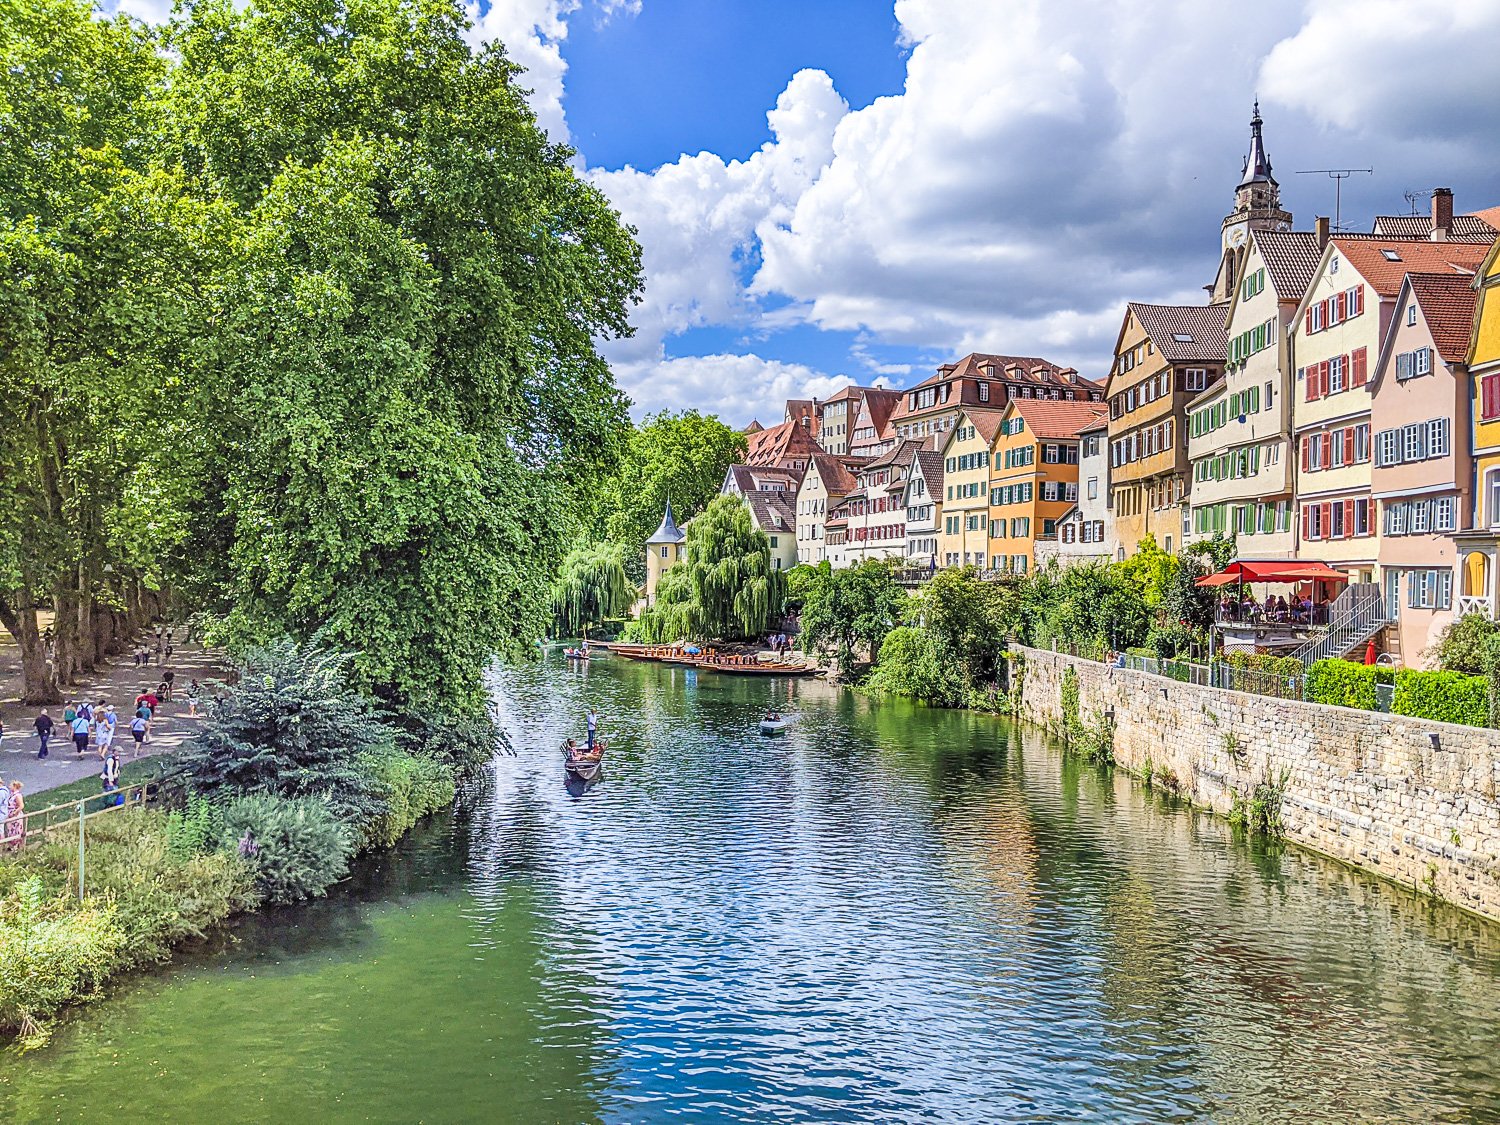 A punting trip is part of a visit to Tübingen